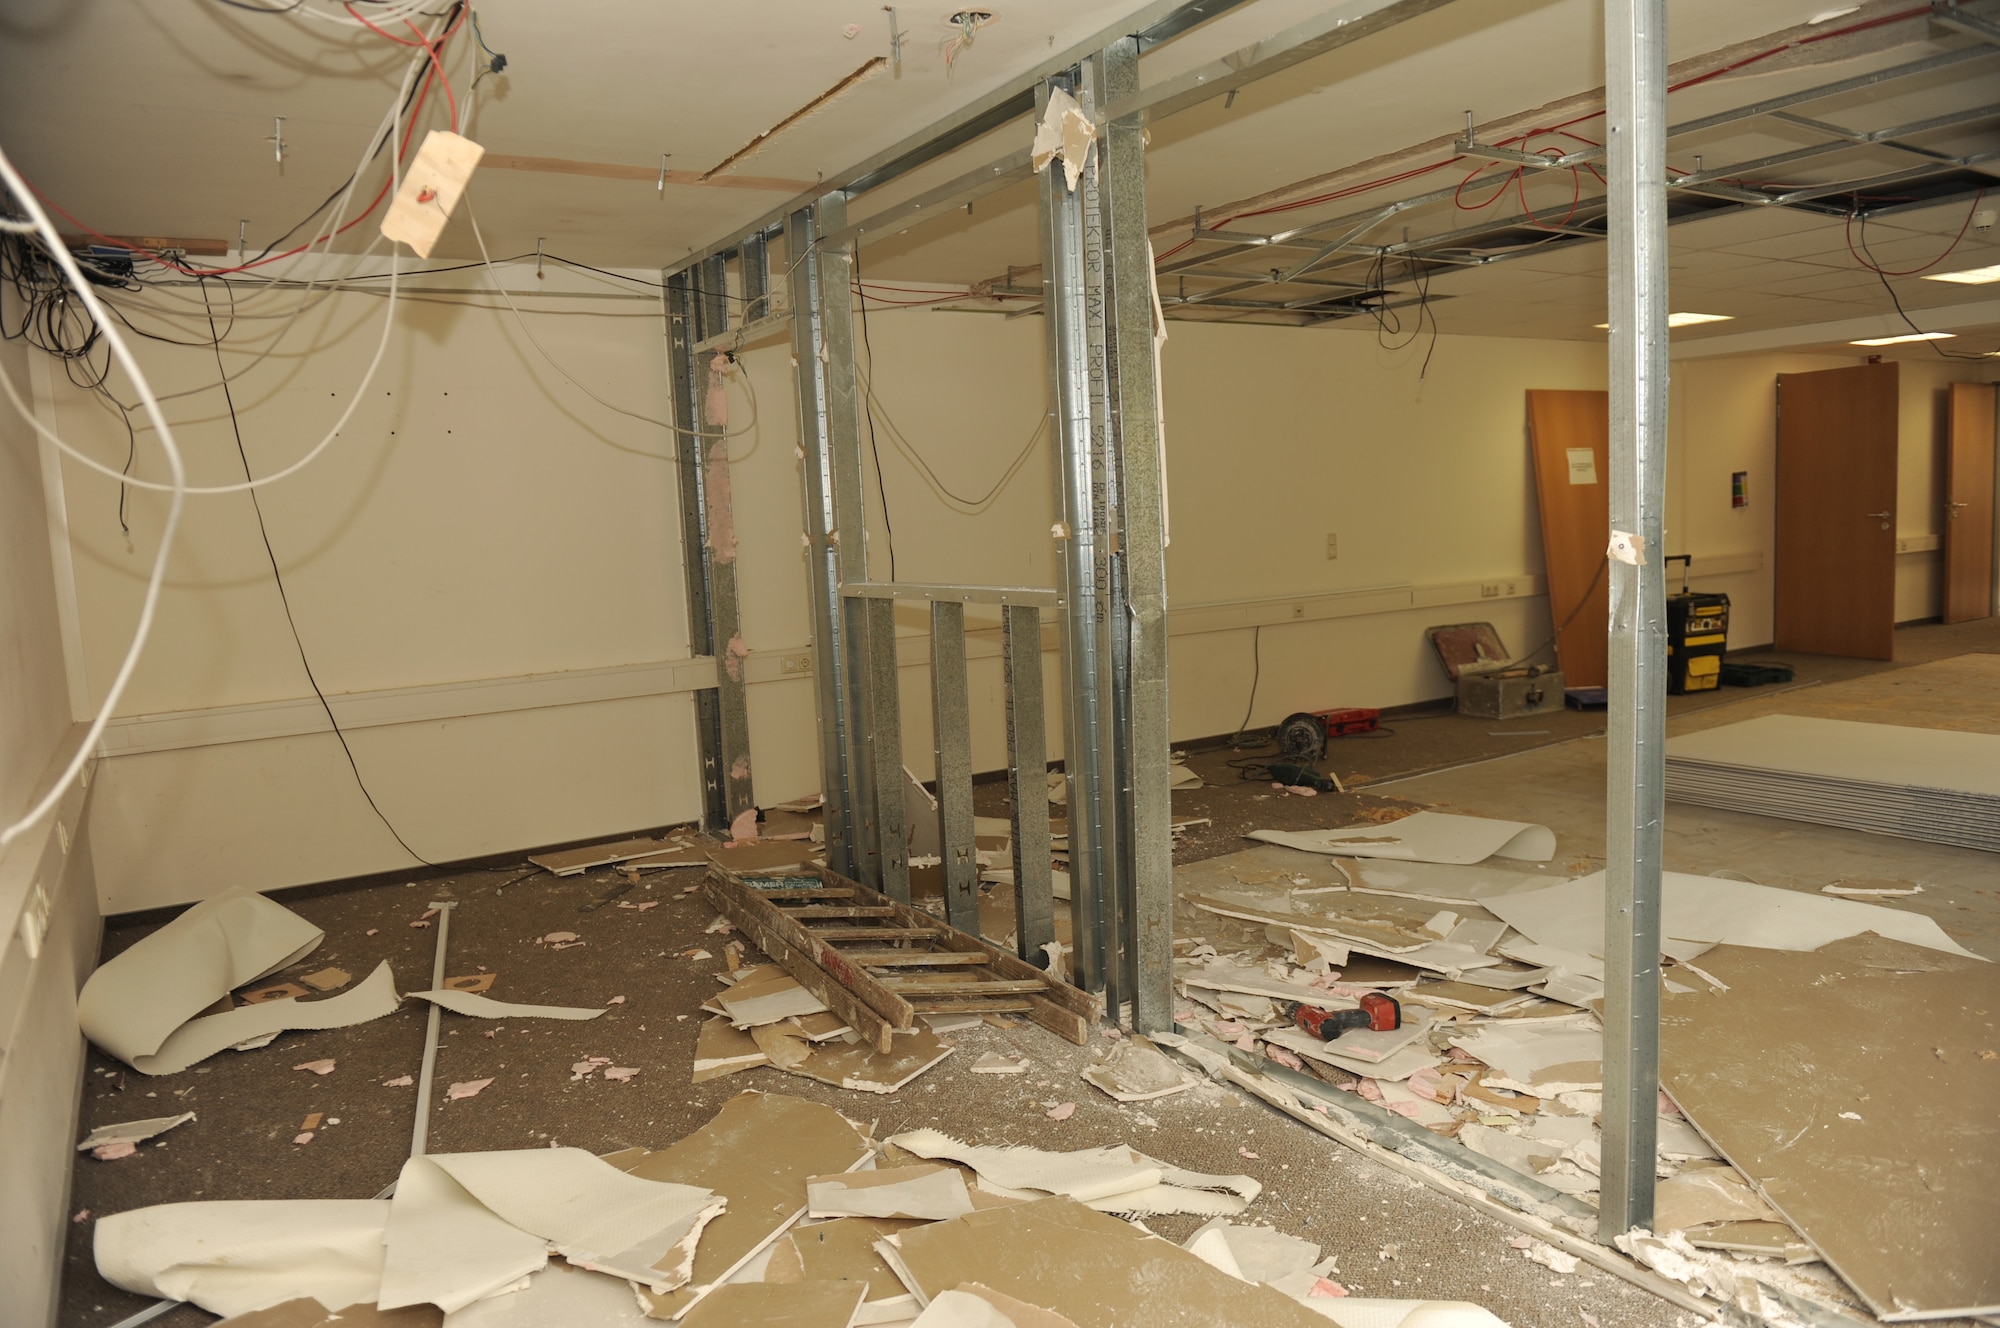 SPANGDAHLEM AIR BASE, Germany -- In an effort to improve the finance customer-service lobby, the finance office is under renovation until Nov. 2. The customer service lobby is temporarily located in Bldg. 128, Room 211. (U.S. Air Force photo/Airman 1st Class Brittney Frees)